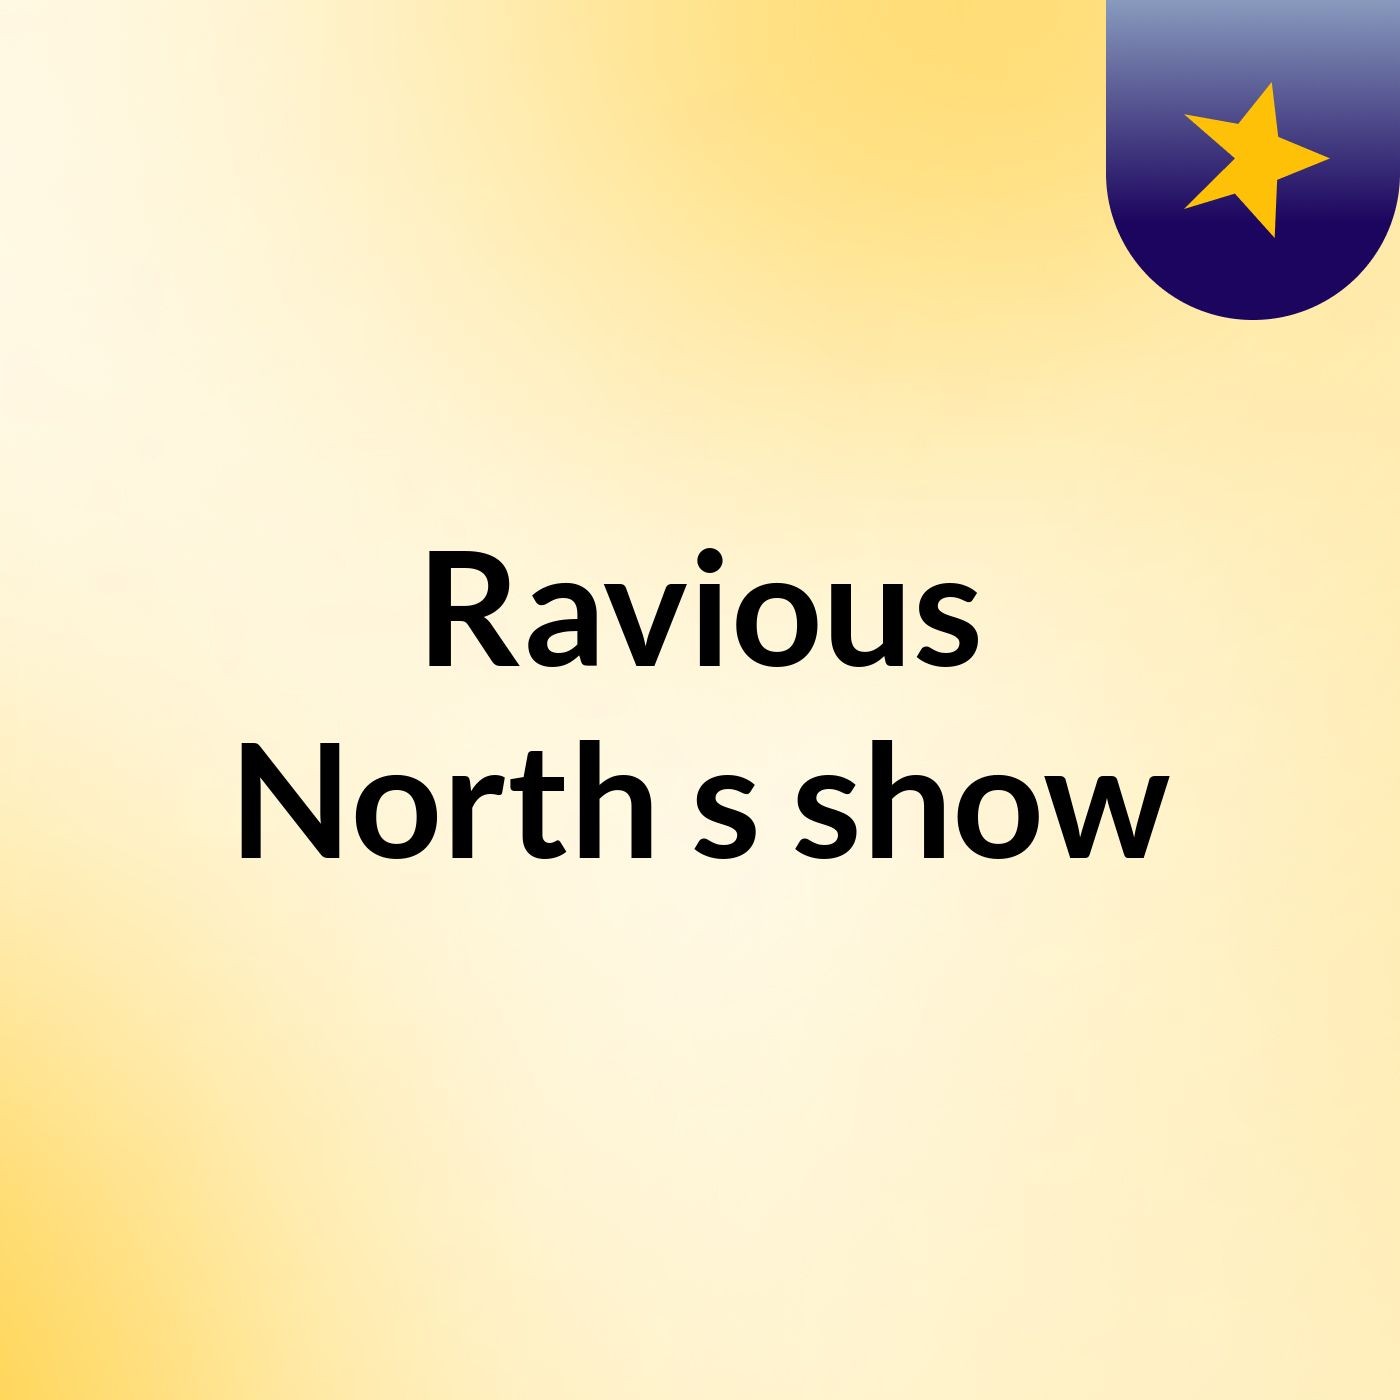 Ravious North's show